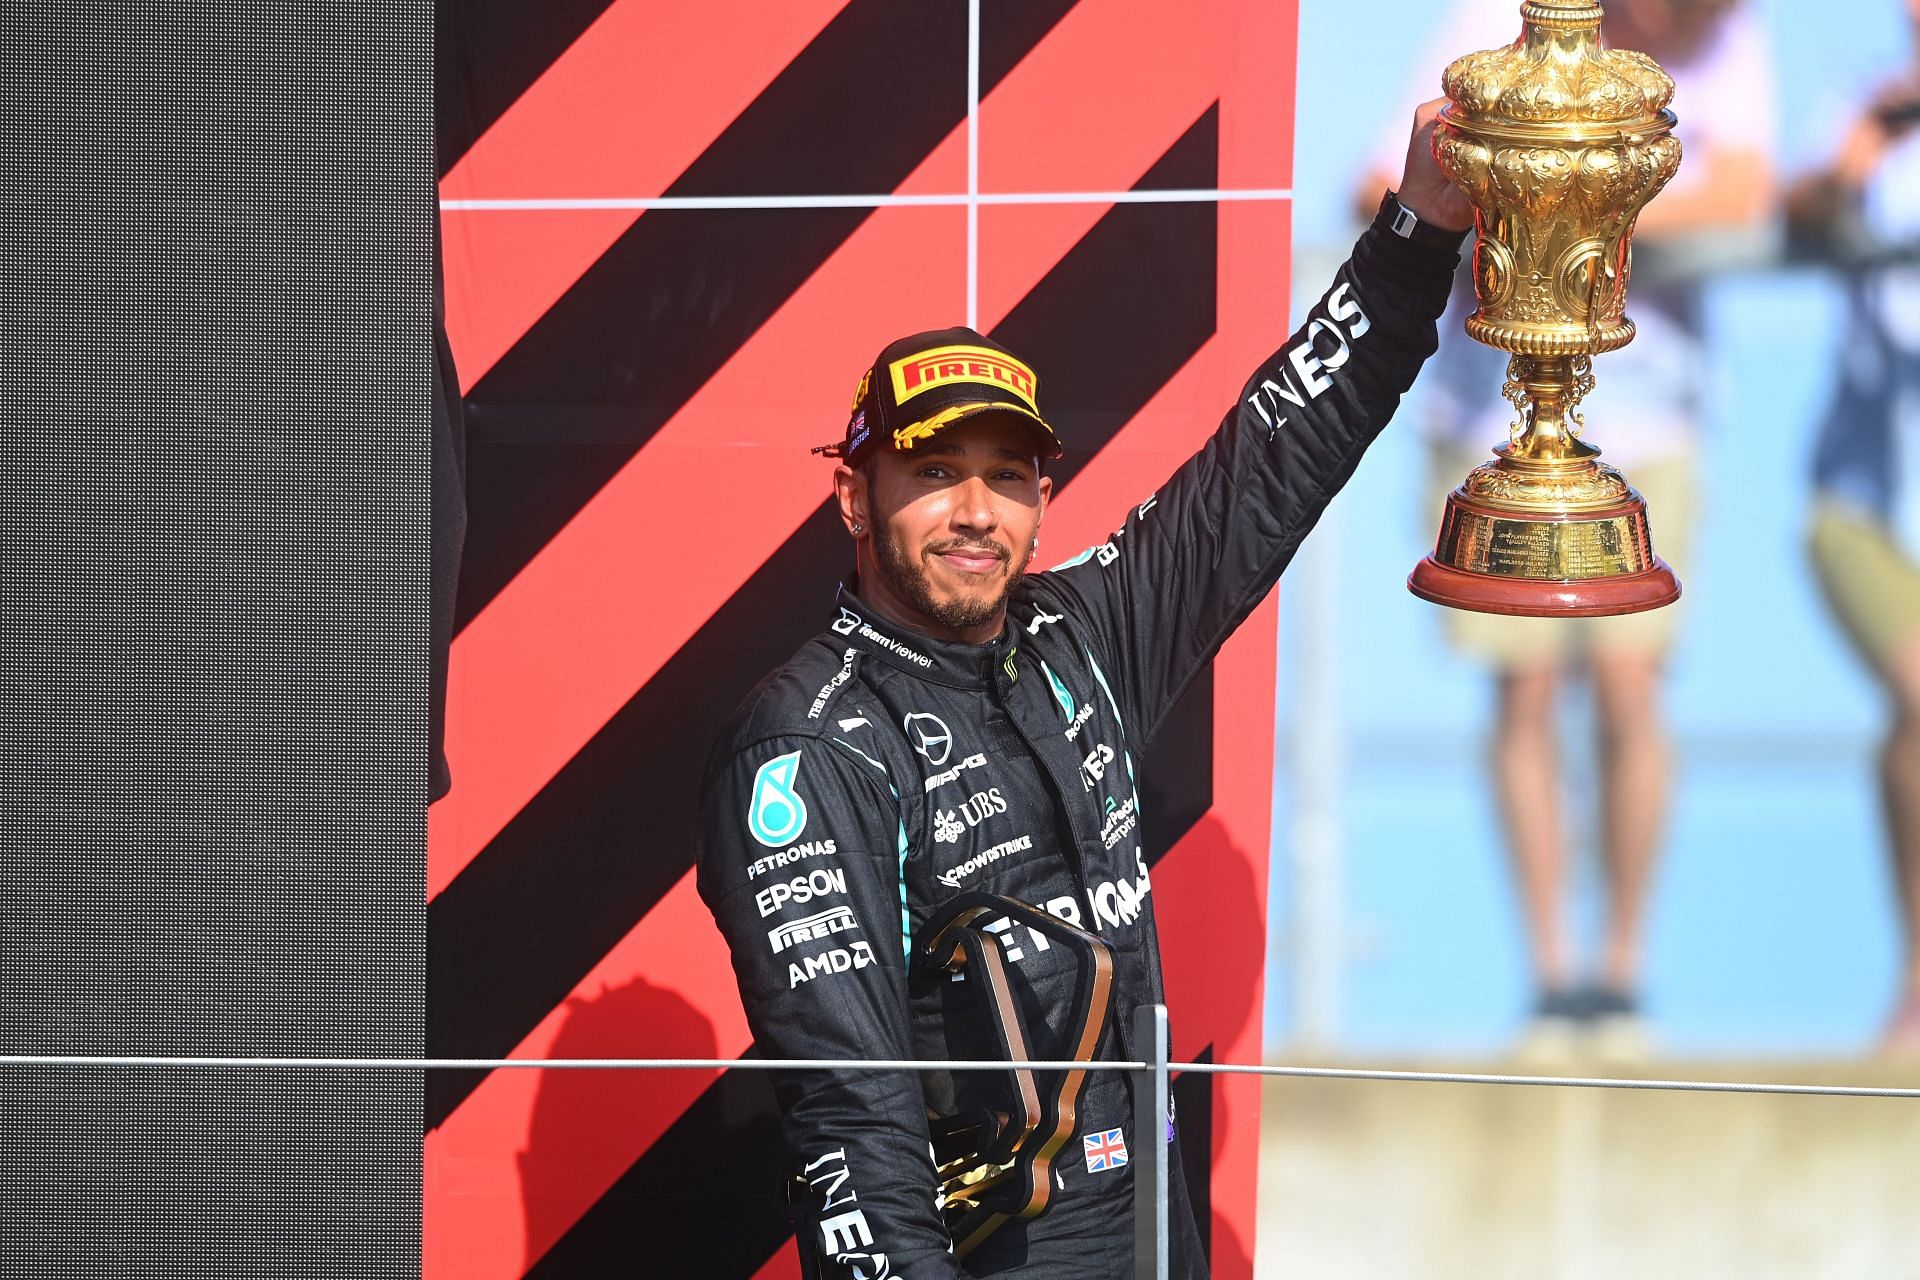 F1 Grand Prix of Great Britain - Lewis Hamilton wins his home race (Photo by Michael Regan/Getty Images)